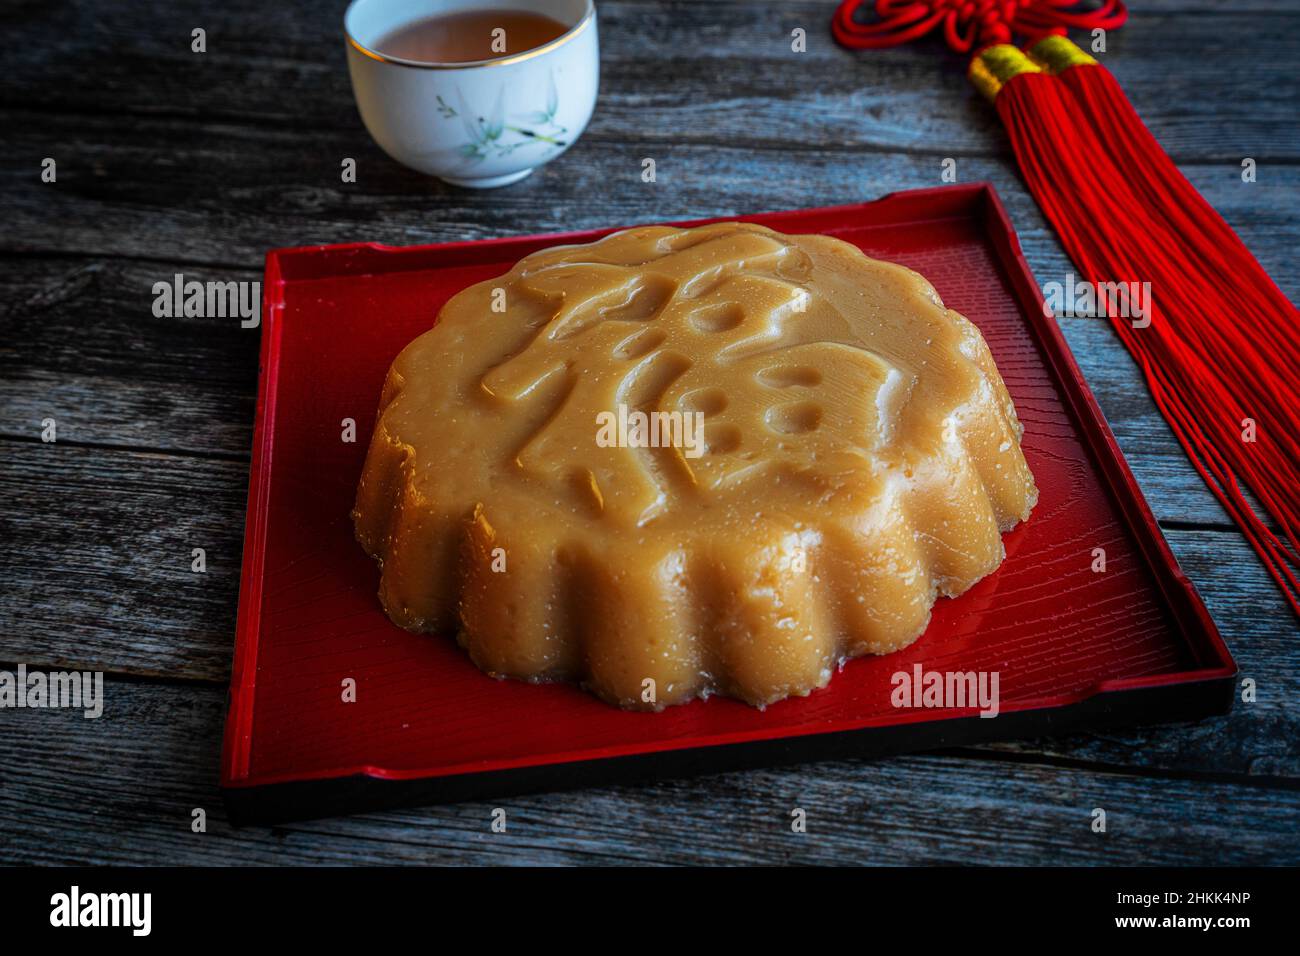 Traditional Chinese New Year sweet rice cake dessert known as Nian Gao, which is made from steamed glutinous rice flour batter. Rice cake with Chinese Stock Photo